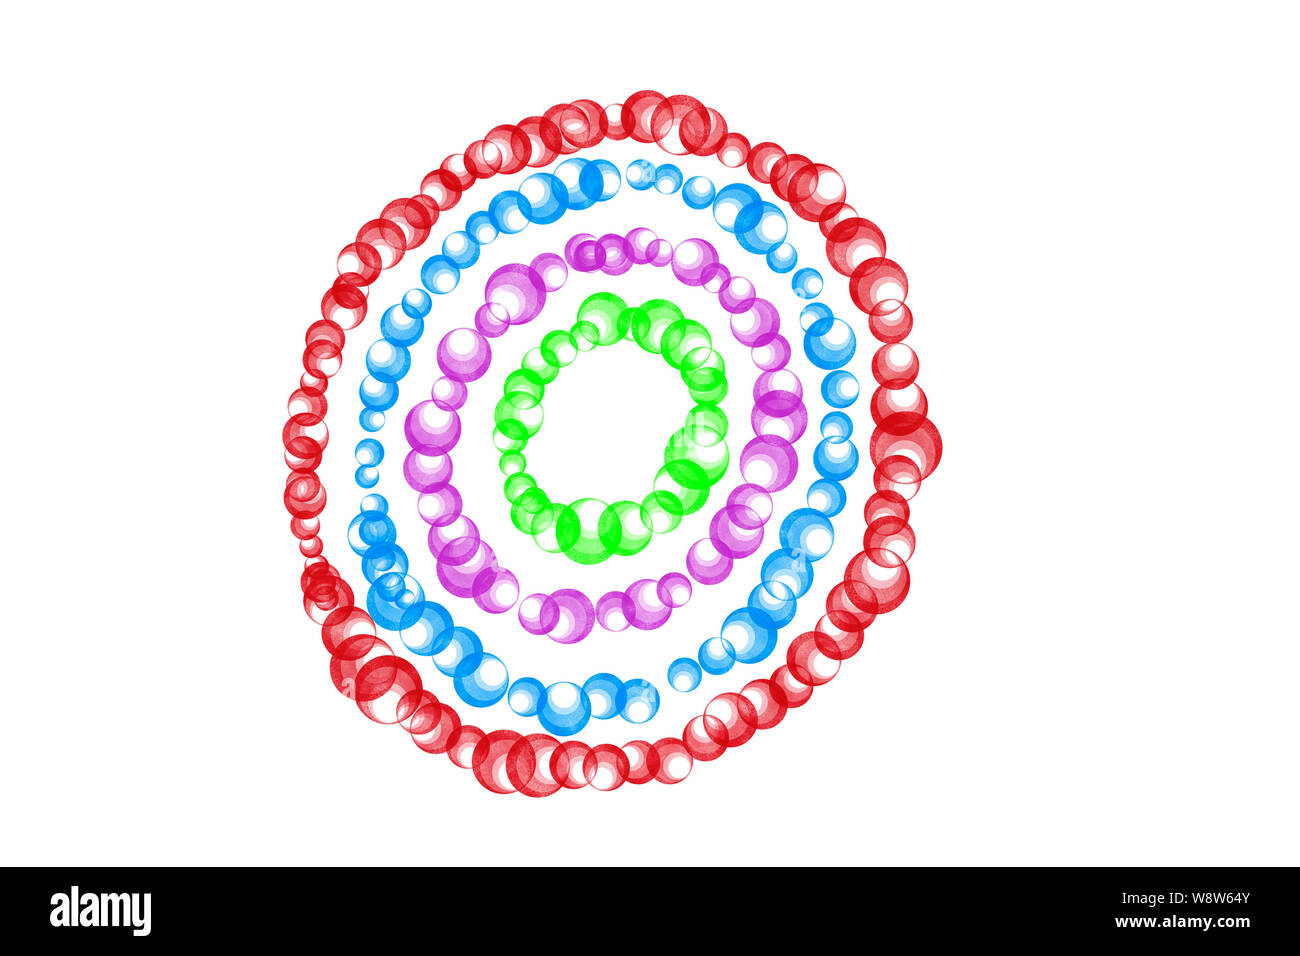 Concentric circles of bubbles in various colors Stock Photo